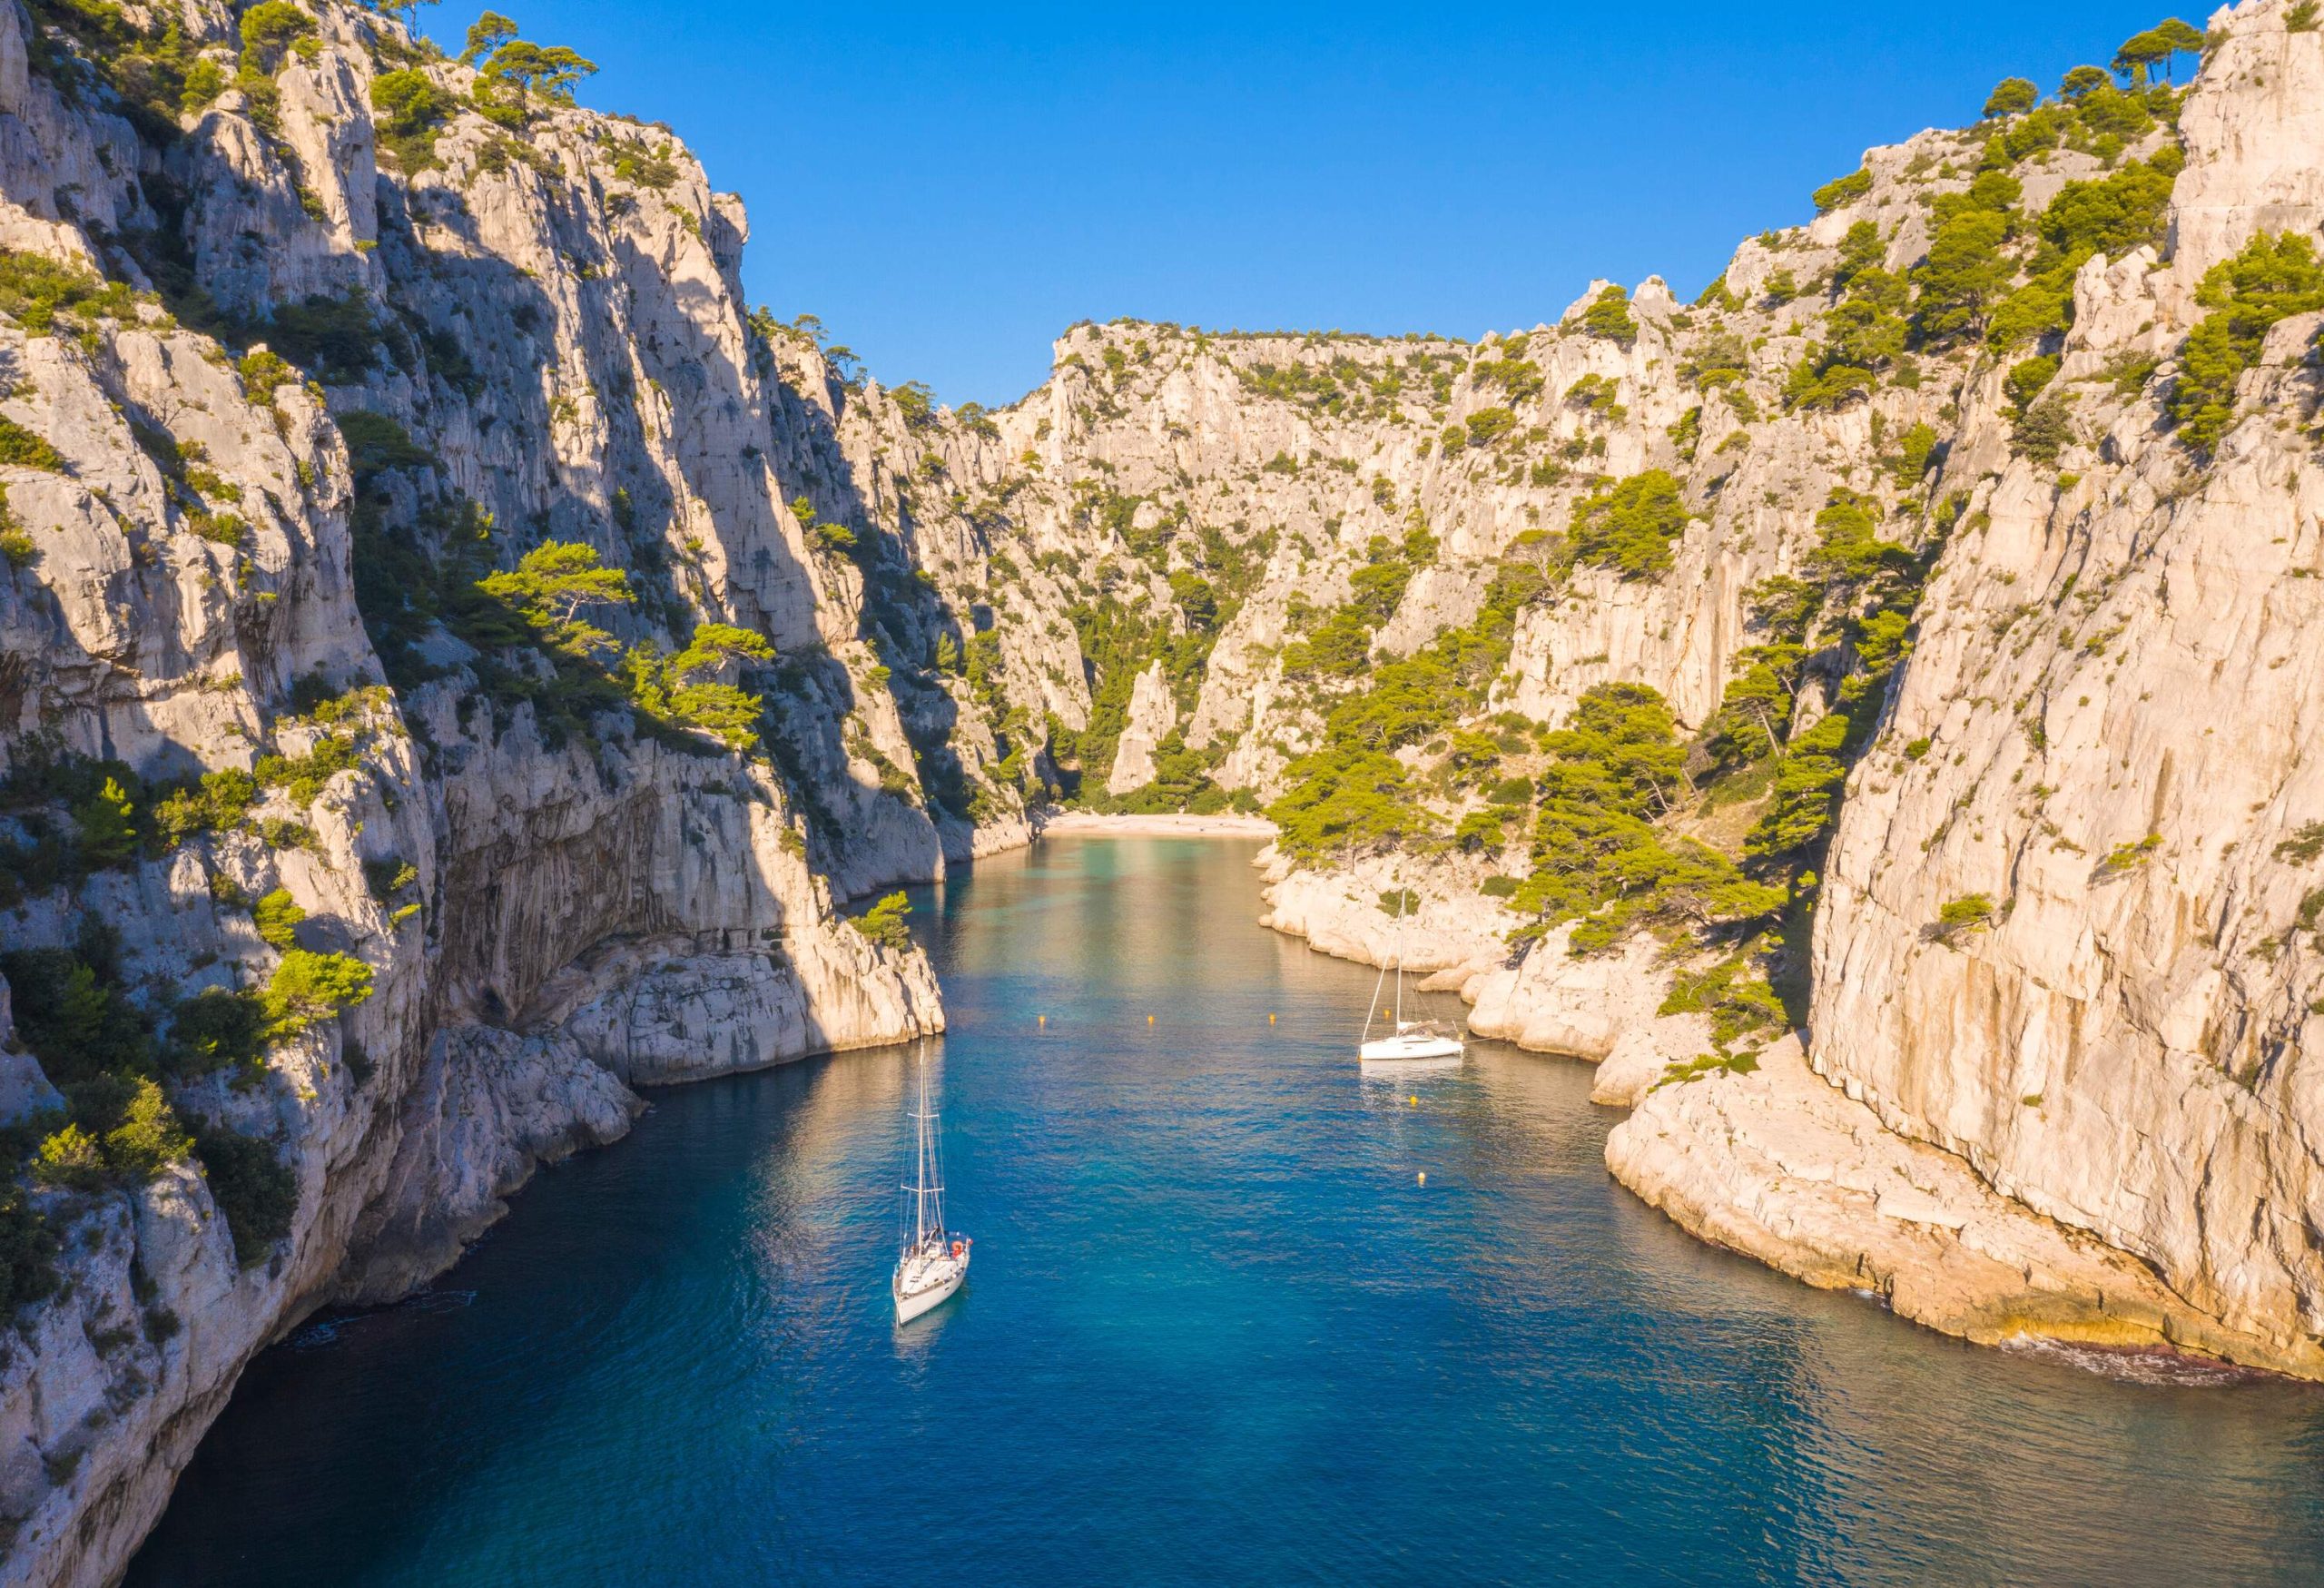 A picturesque view of white boats in the turquoise water cliff cove.